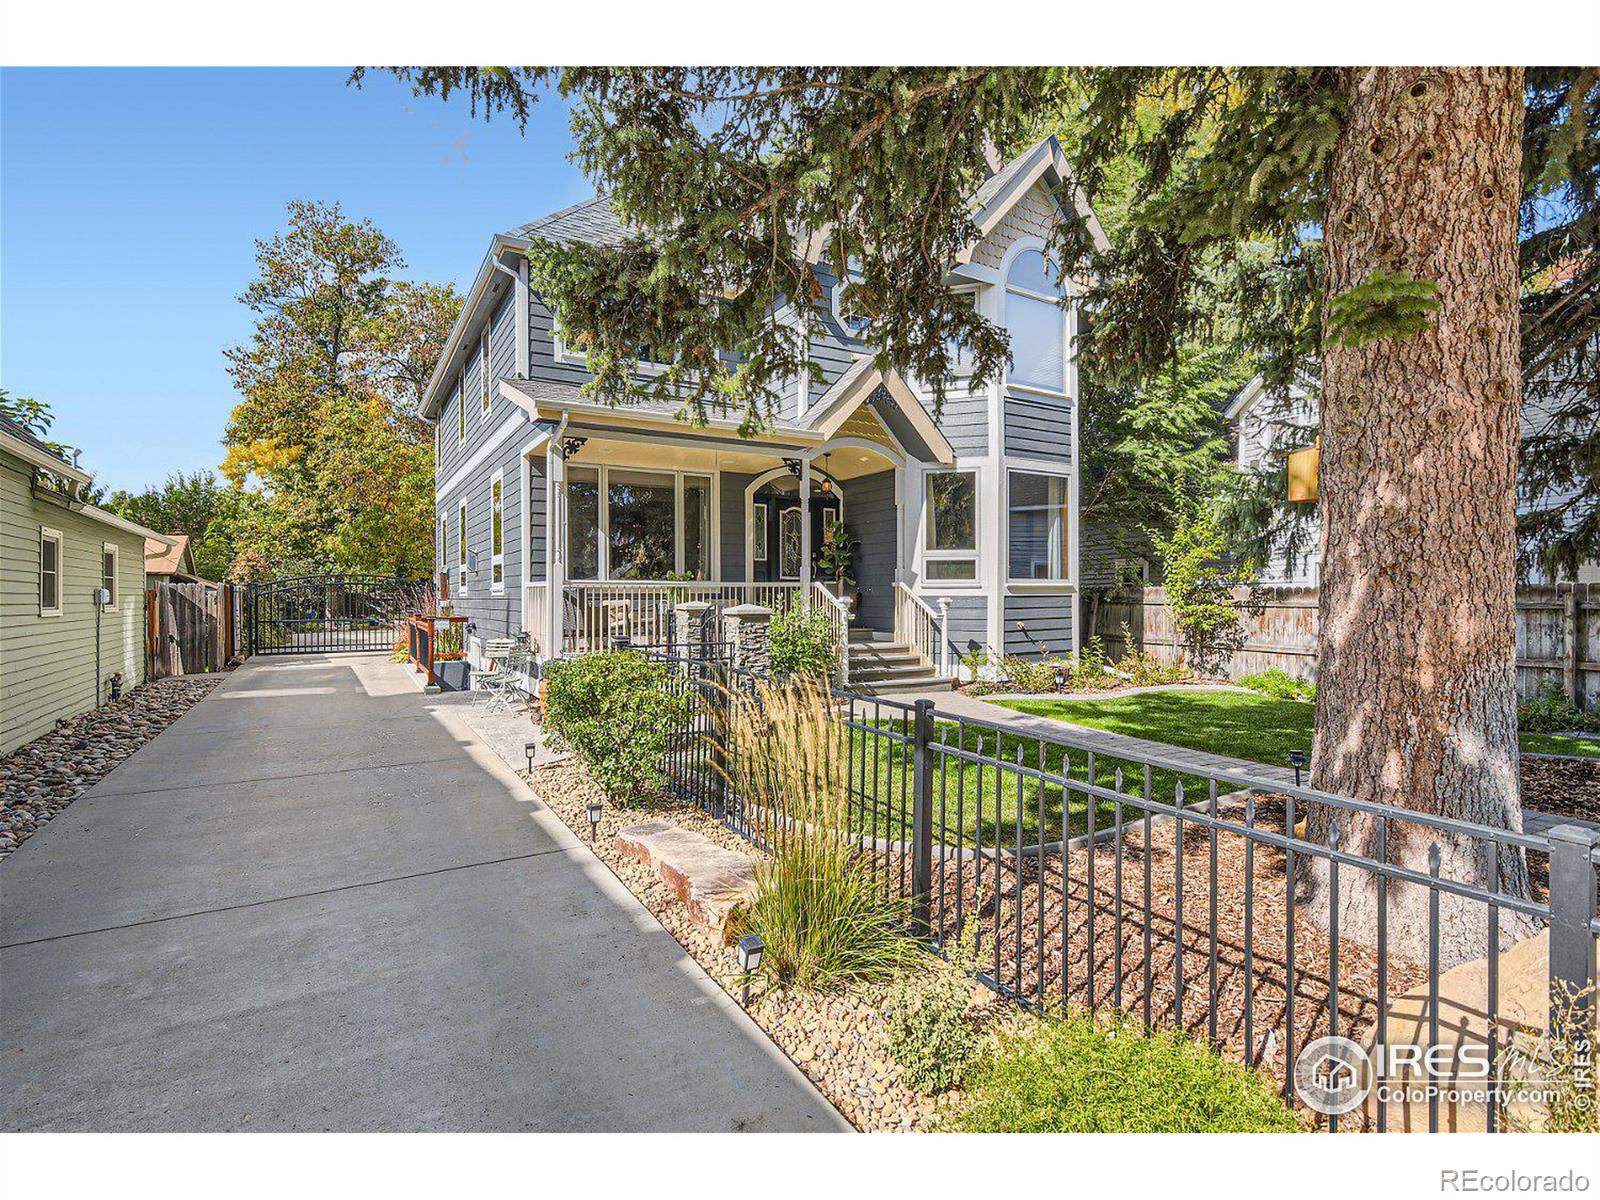 CMA Image for 321 N Meldrum Street,Fort Collins, Colorado